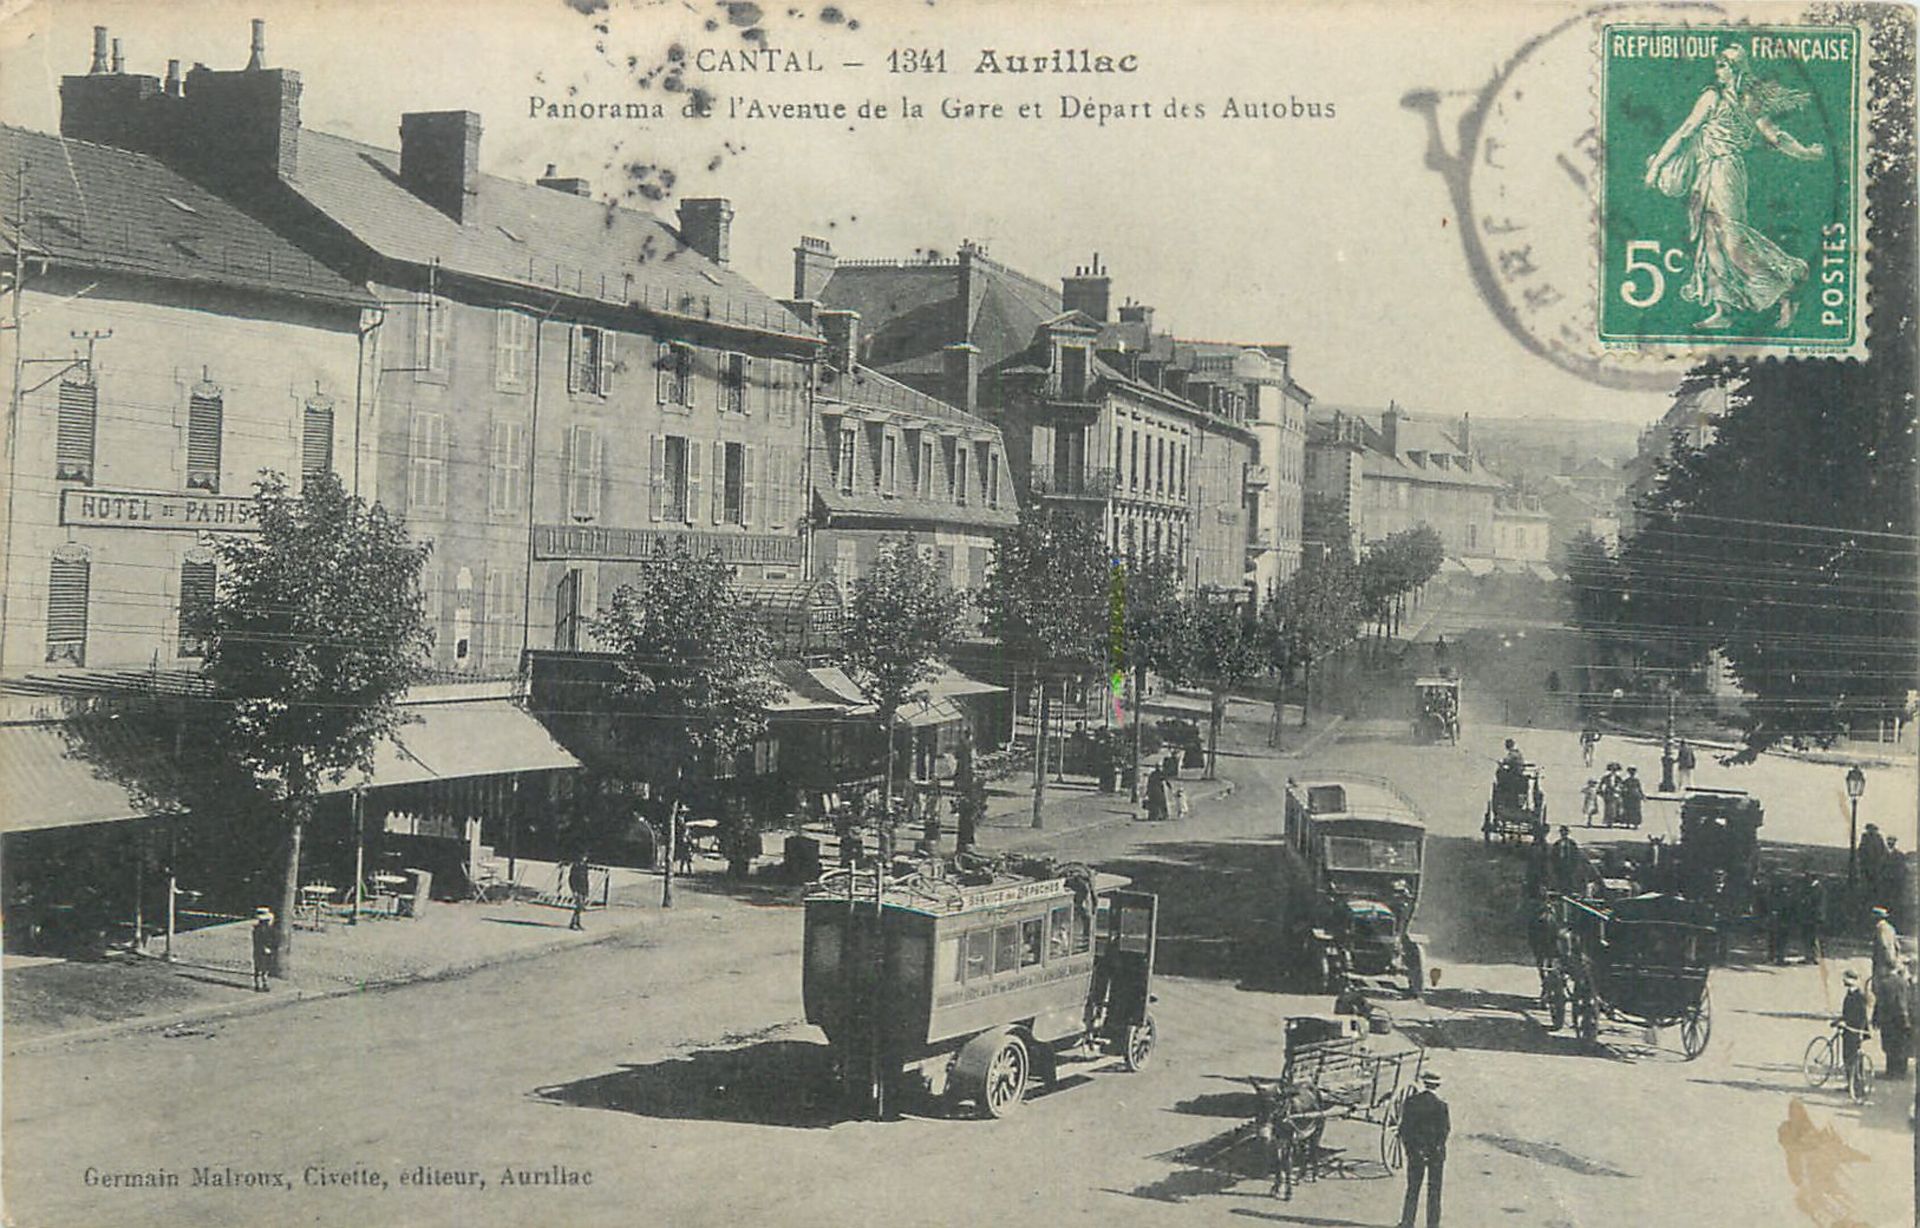 Null 63 CANTAL POSTCARDS: Cities, qs villages, qs animations, qs sites, qs gener&hellip;